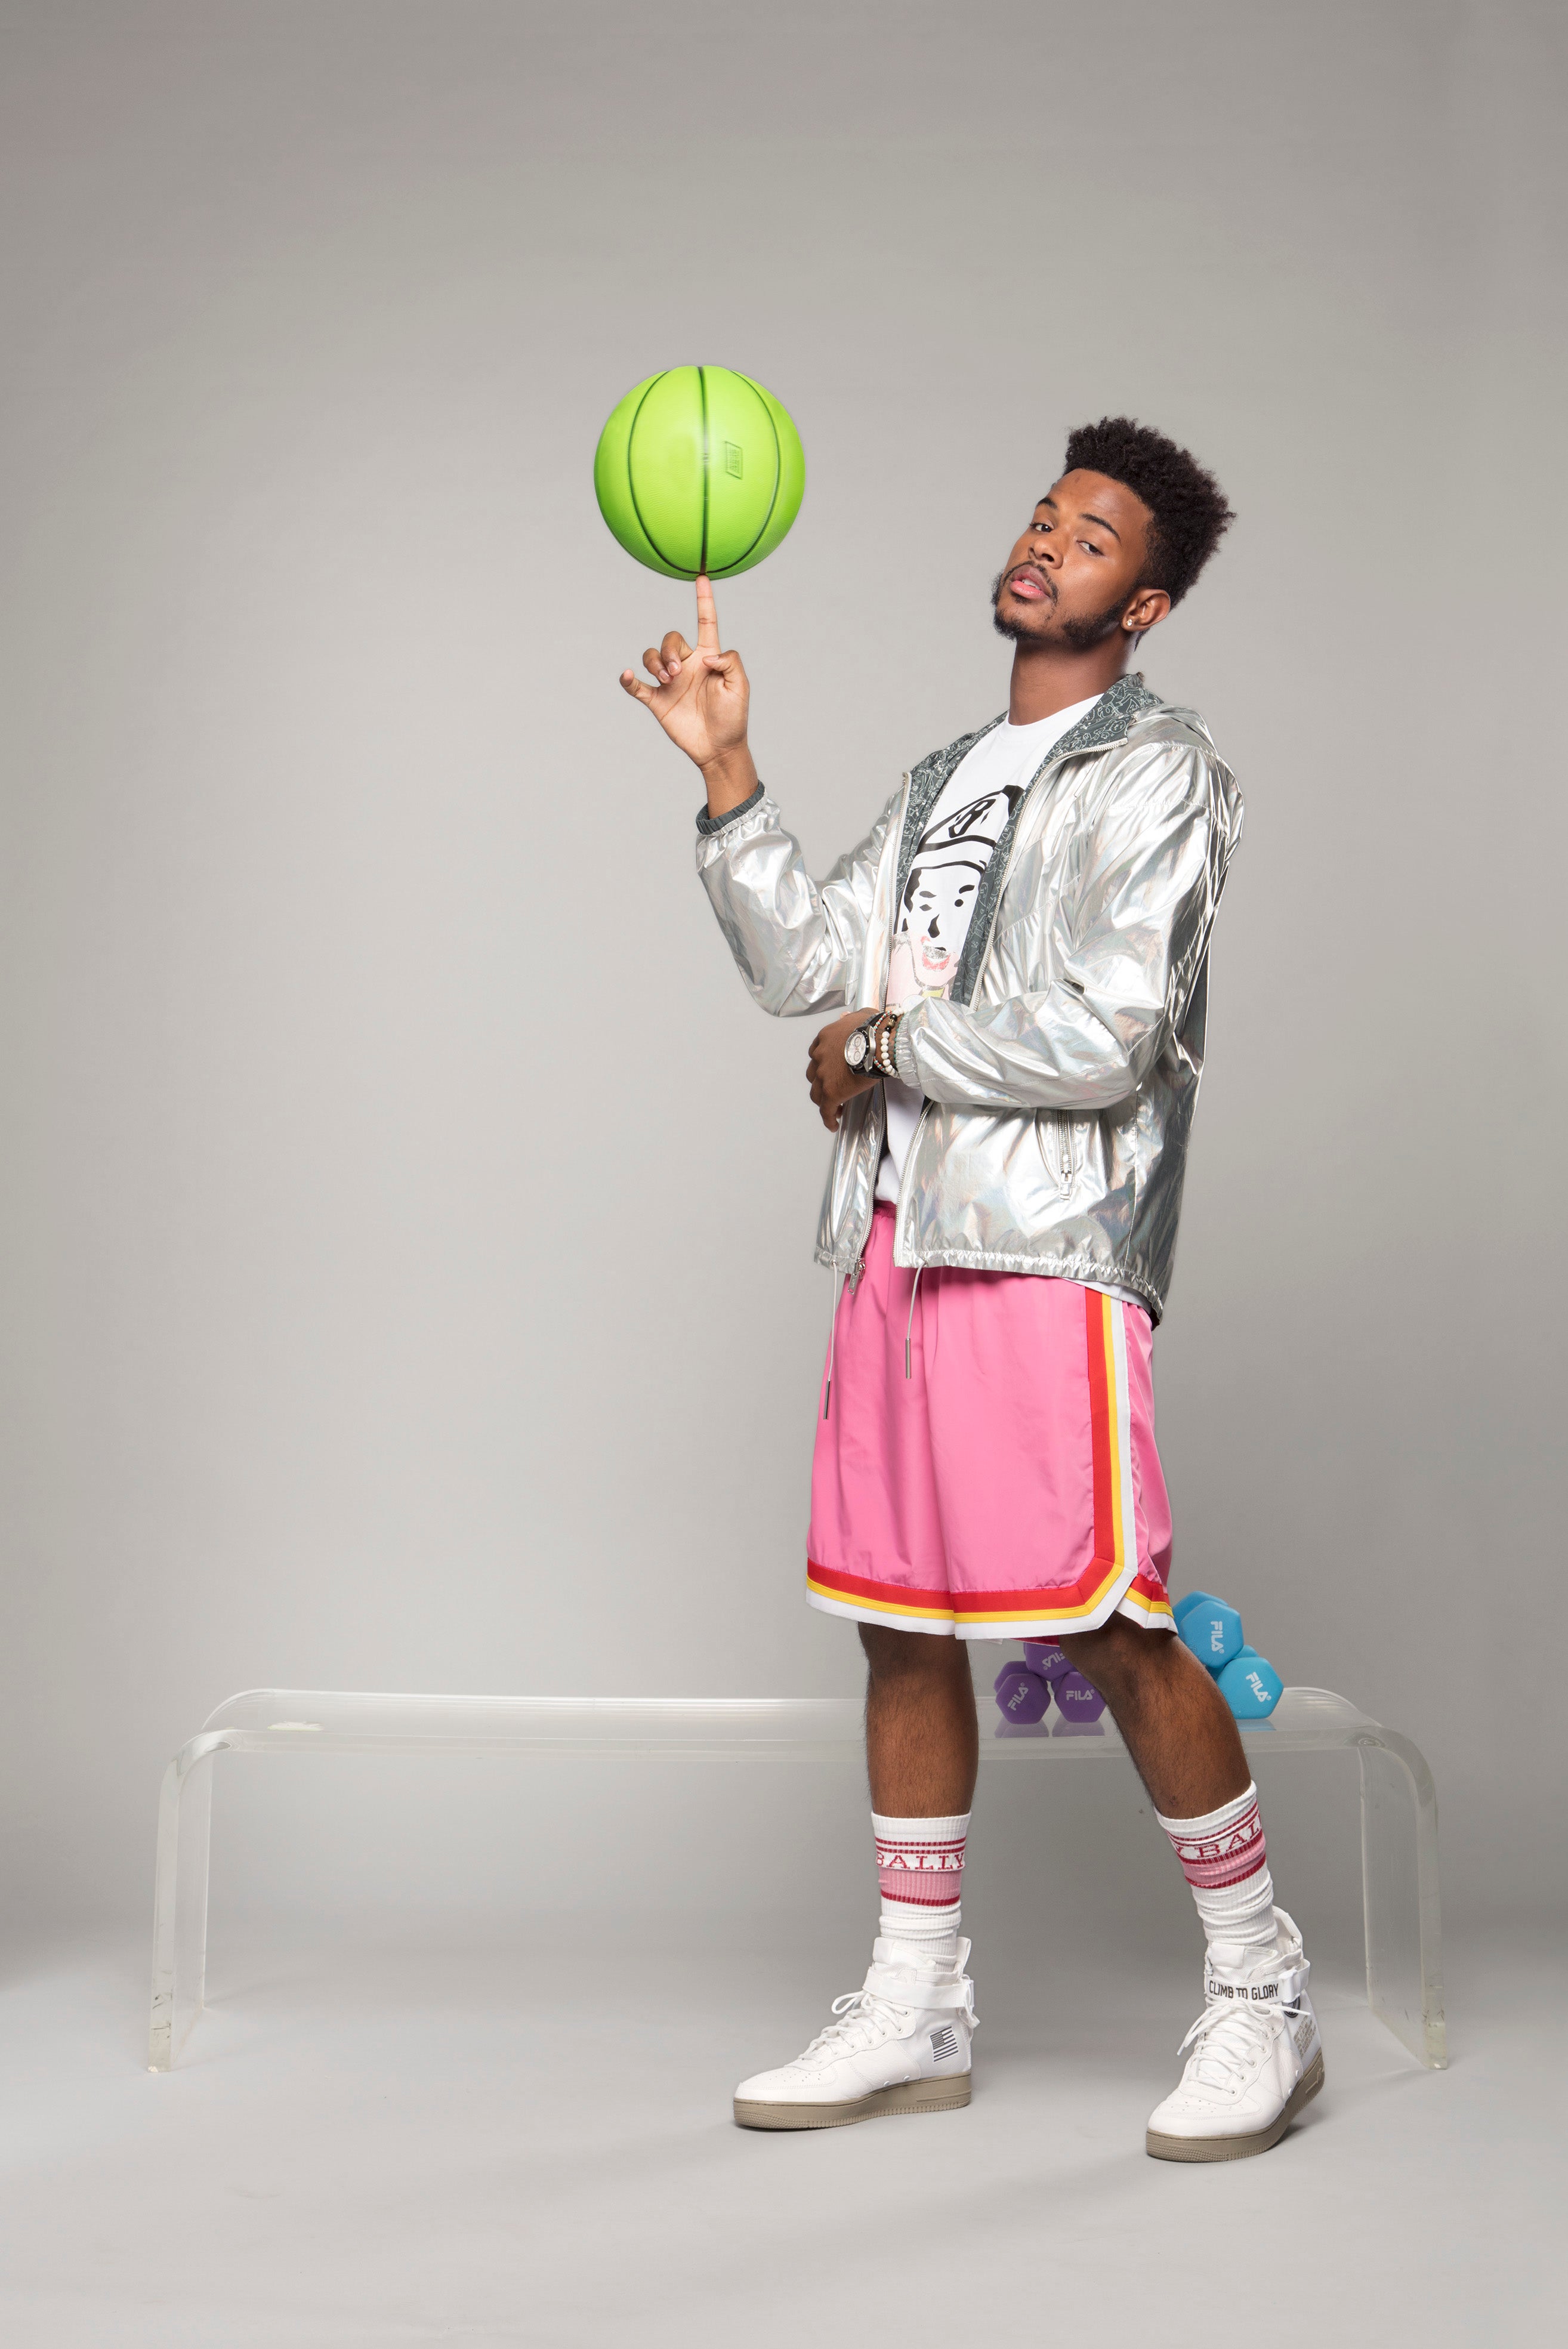 Style Your Guy: Trevor Jackson Schools Us On Life And How To Rock Modern Sportswear
